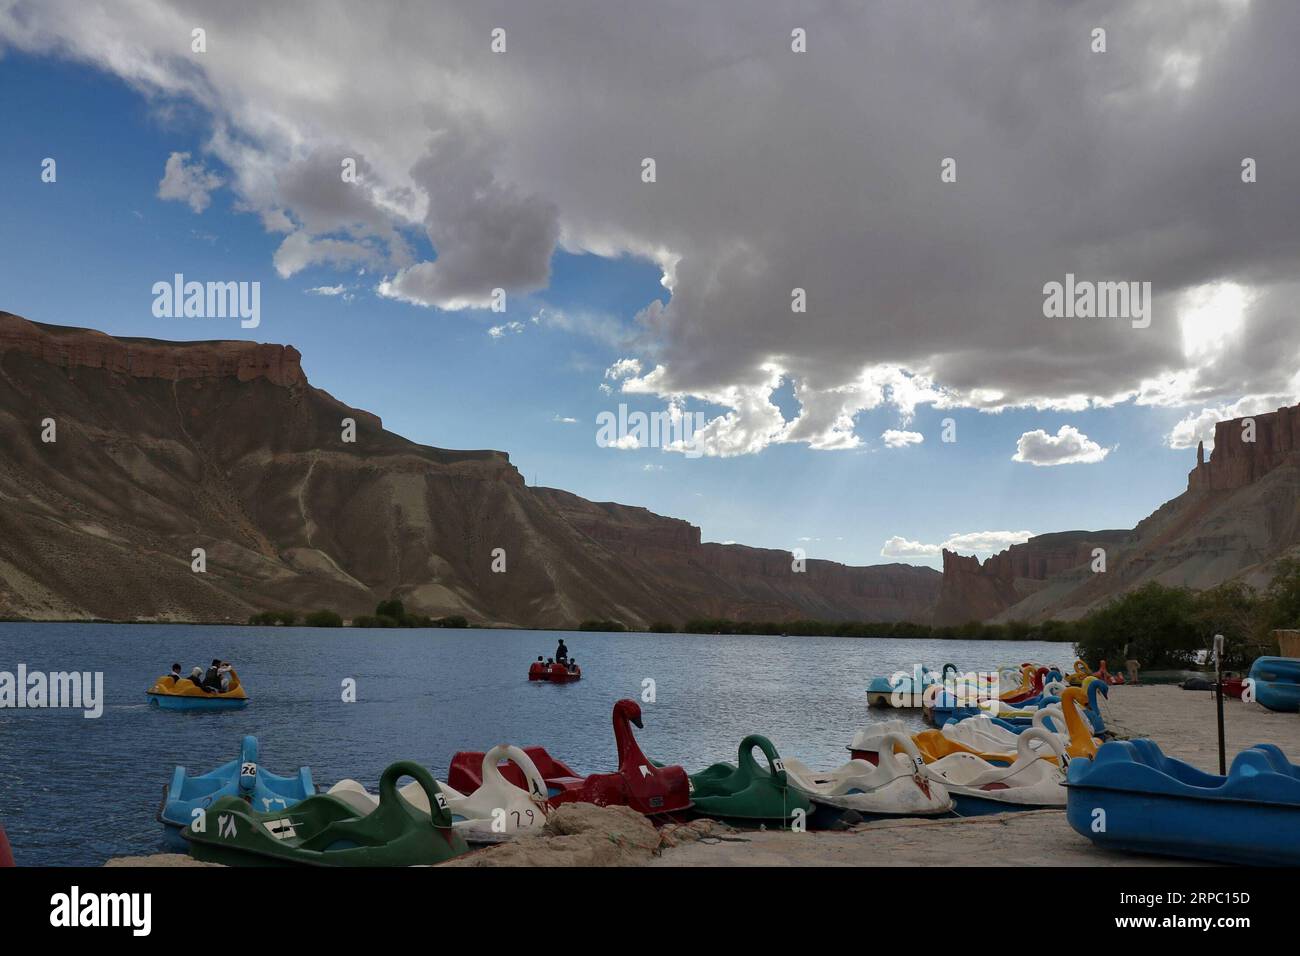 (190621) -- BAMYAN, June 21, 2019 -- Photo taken on June 19, 2019 shows the Band-e-Amir lake in Bamyan province, central Afghanistan. ) AFGHANISTAN-BAMYAN-BAND-E-AMIR LAKE NoorxAzizi PUBLICATIONxNOTxINxCHN Stock Photo